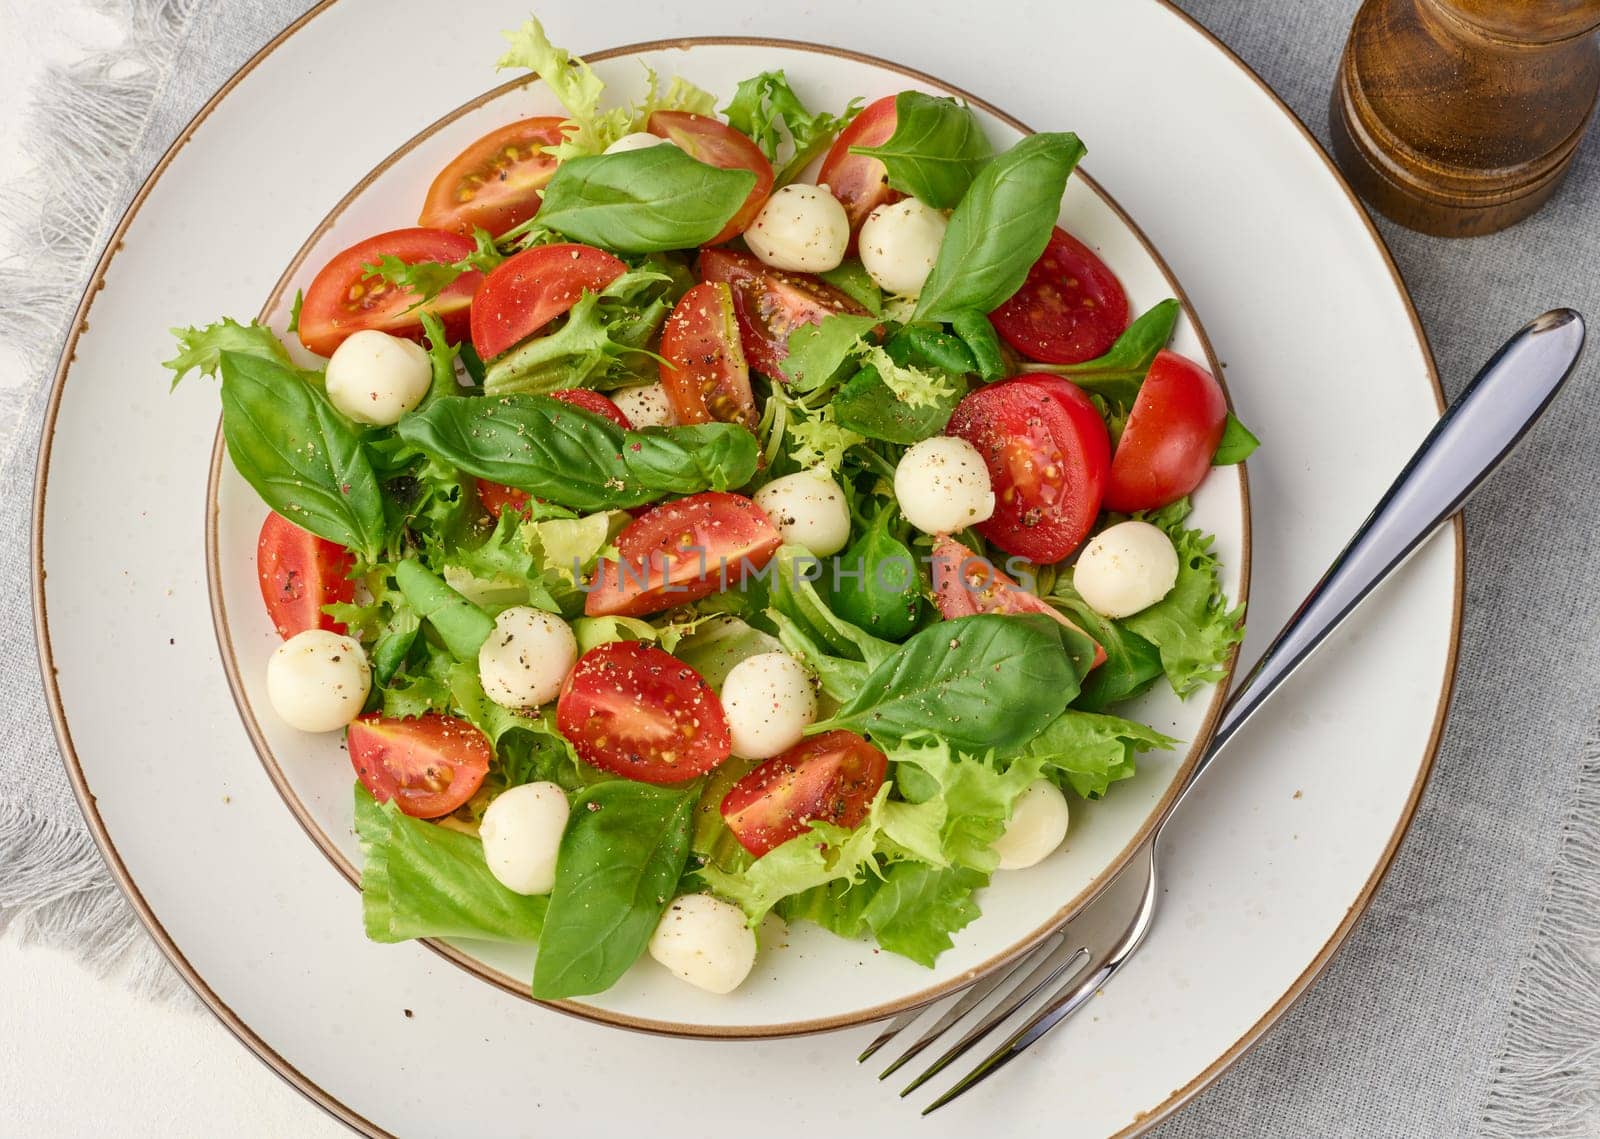 Salad with mozzarella, cherry tomatoes and green lettuce in a white round plate on the table. Top view